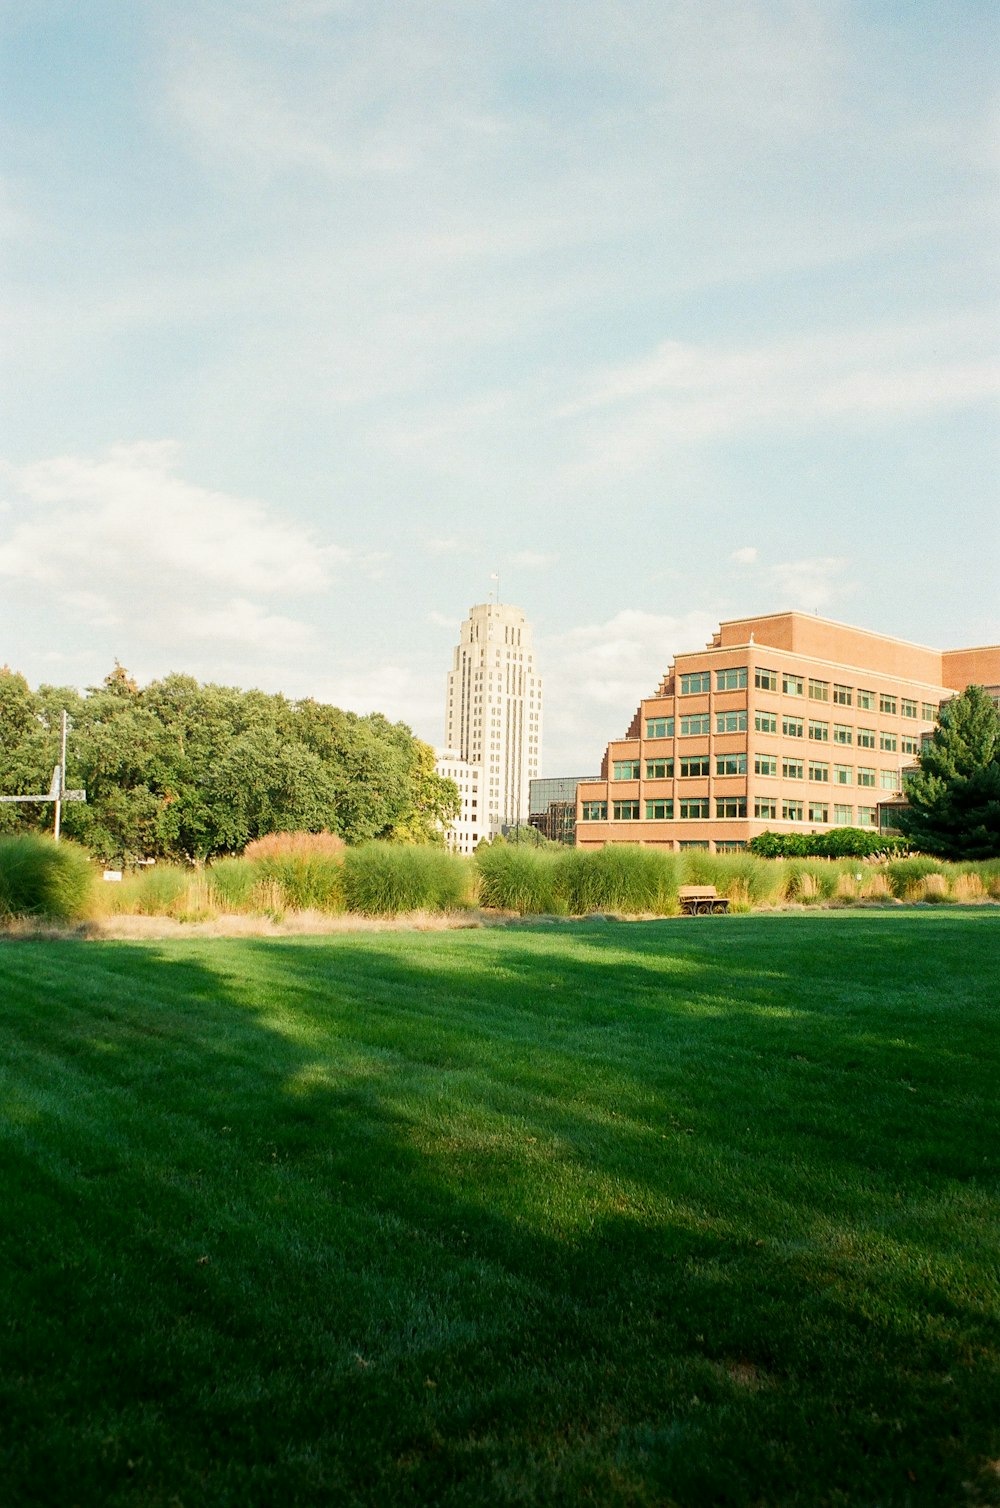 a large grassy field with a building in the background